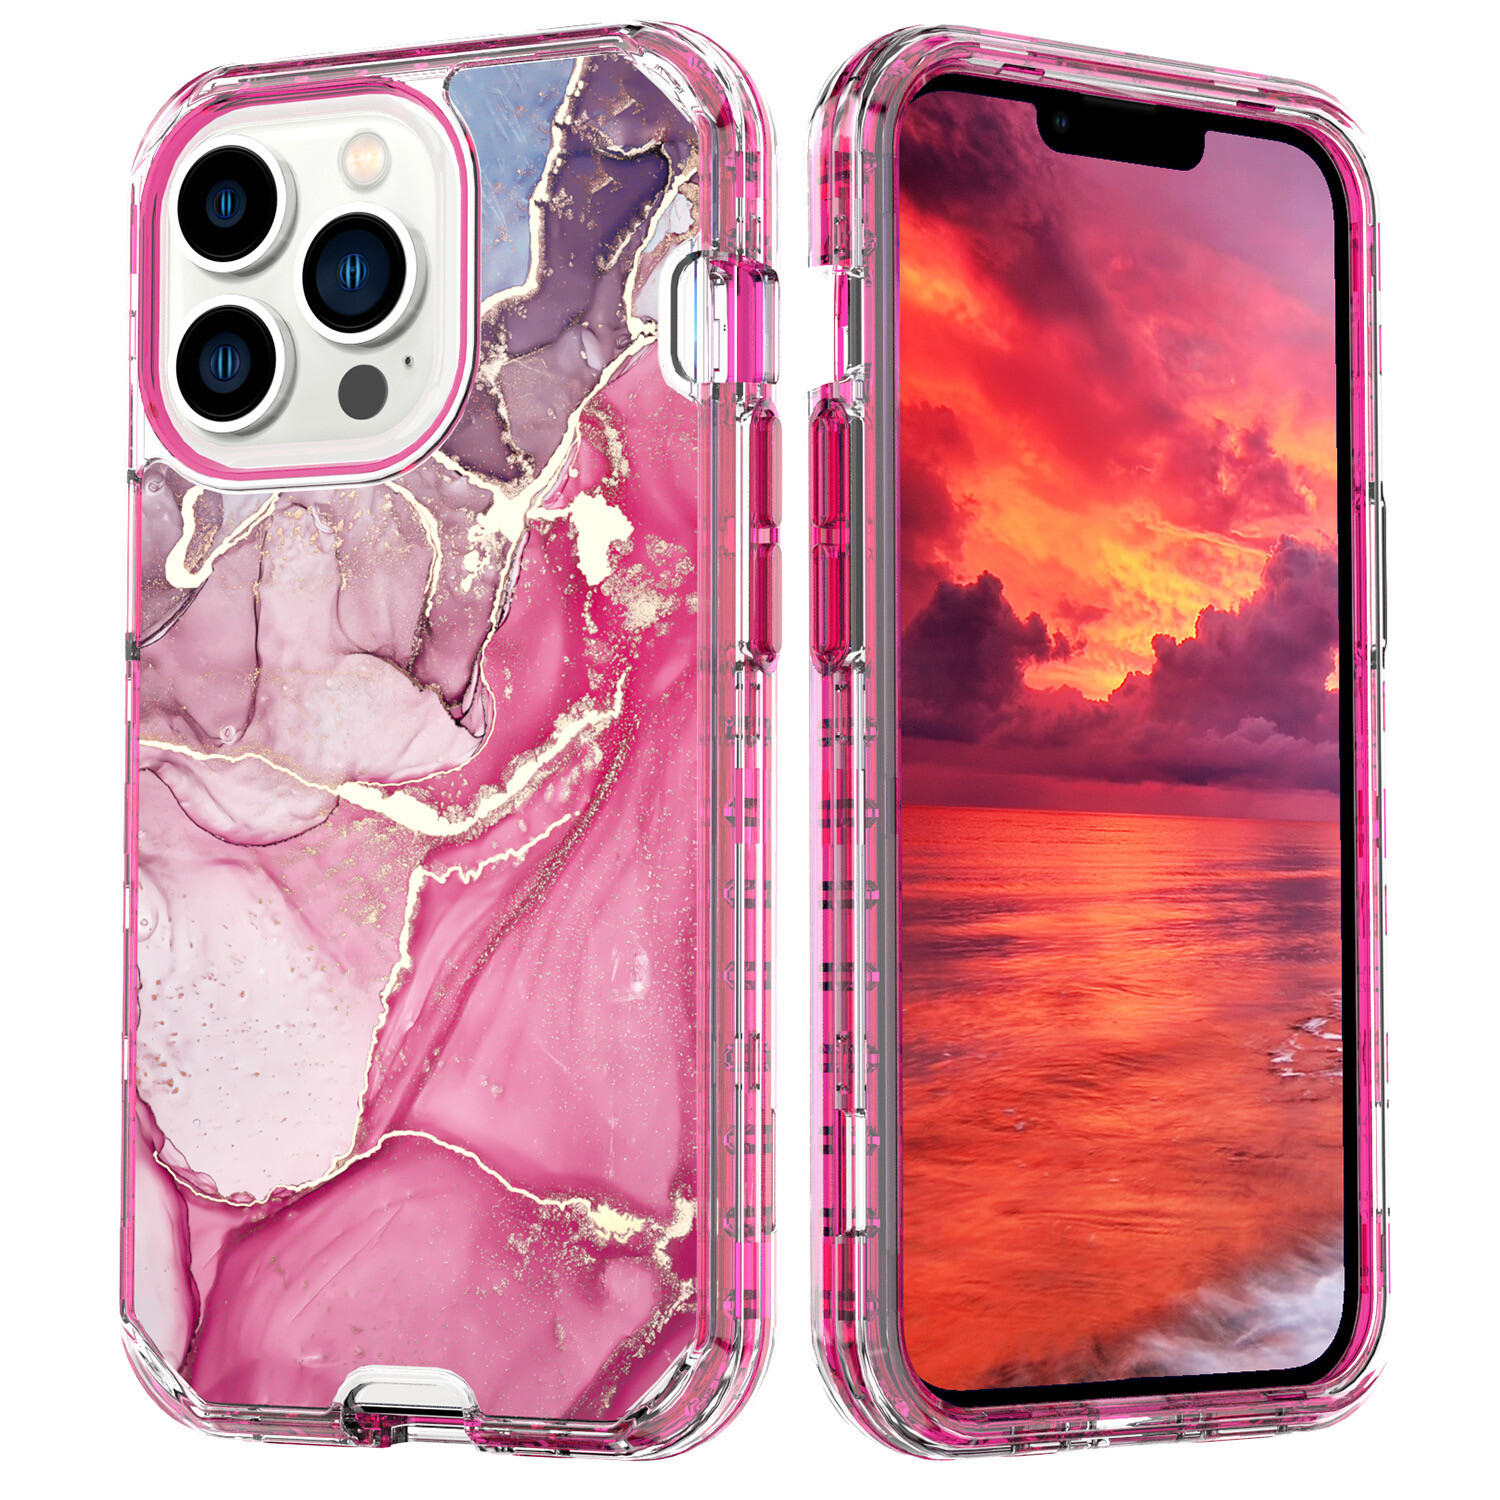 iPhone 13 6.1 Shock Proof Robot Case With Pattern, Color: Pink